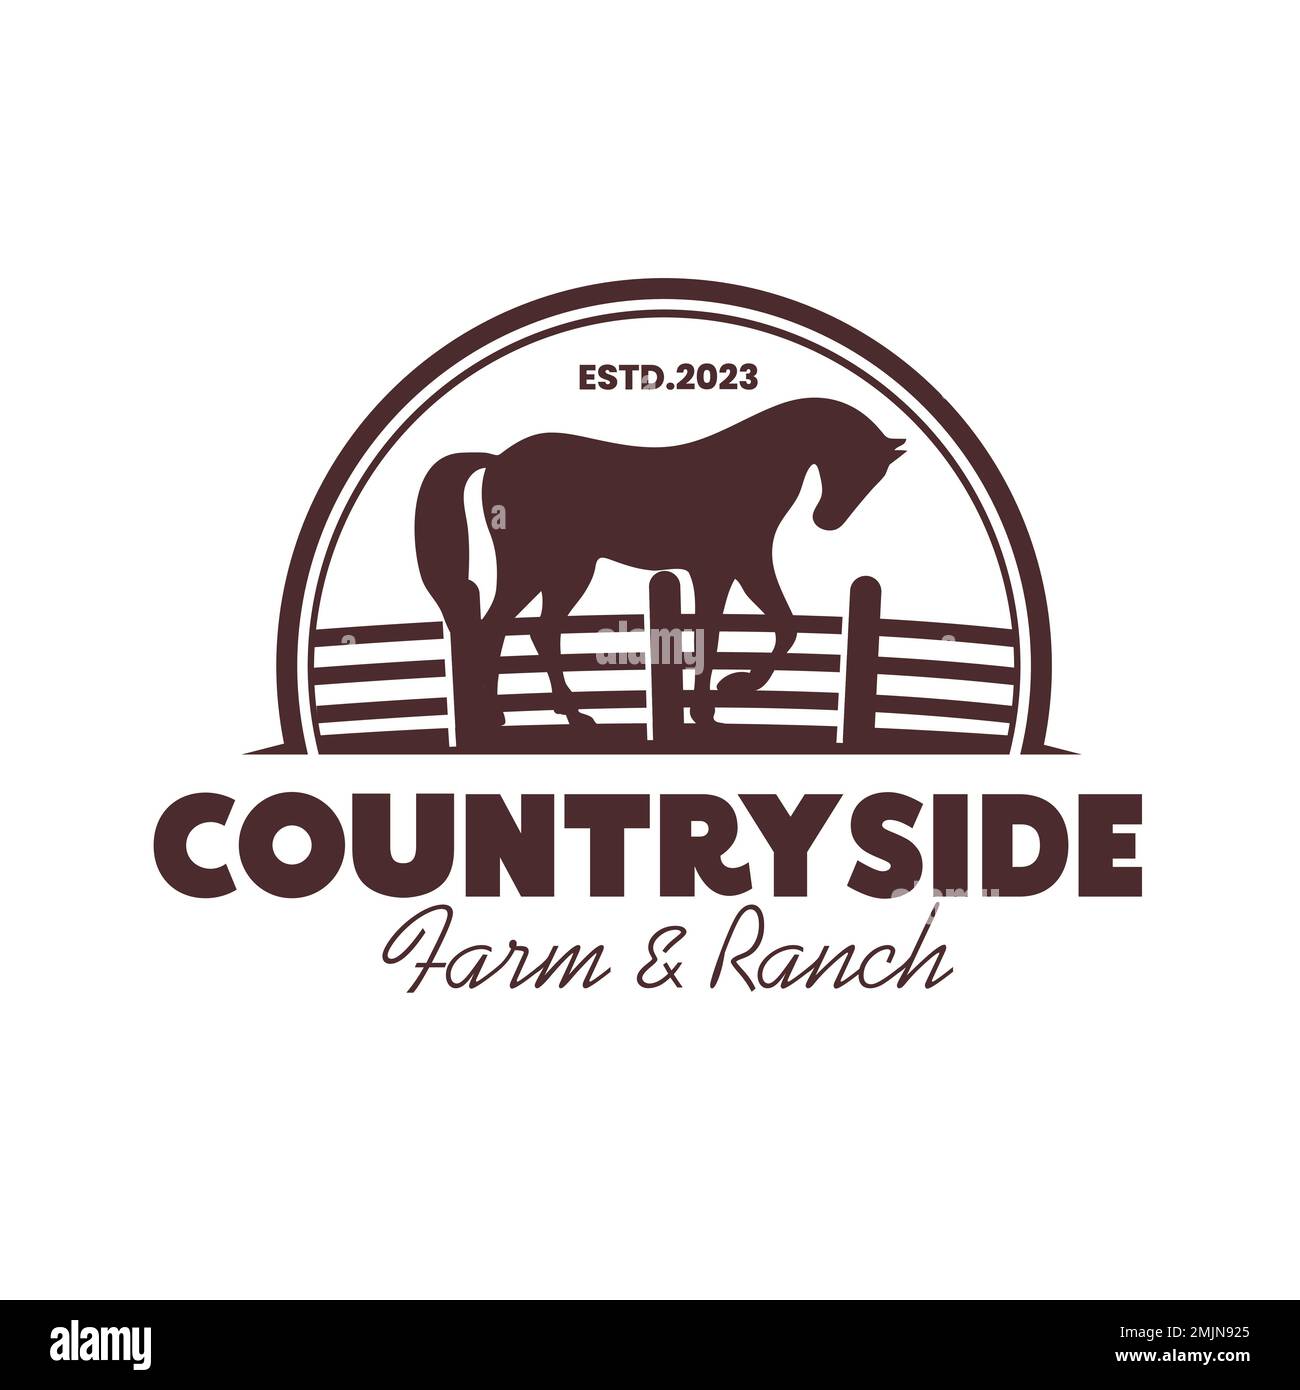 Silhouette illustration of a horse with a wooden fence for vintage retro rural western country farm ranch logo design Stock Vector